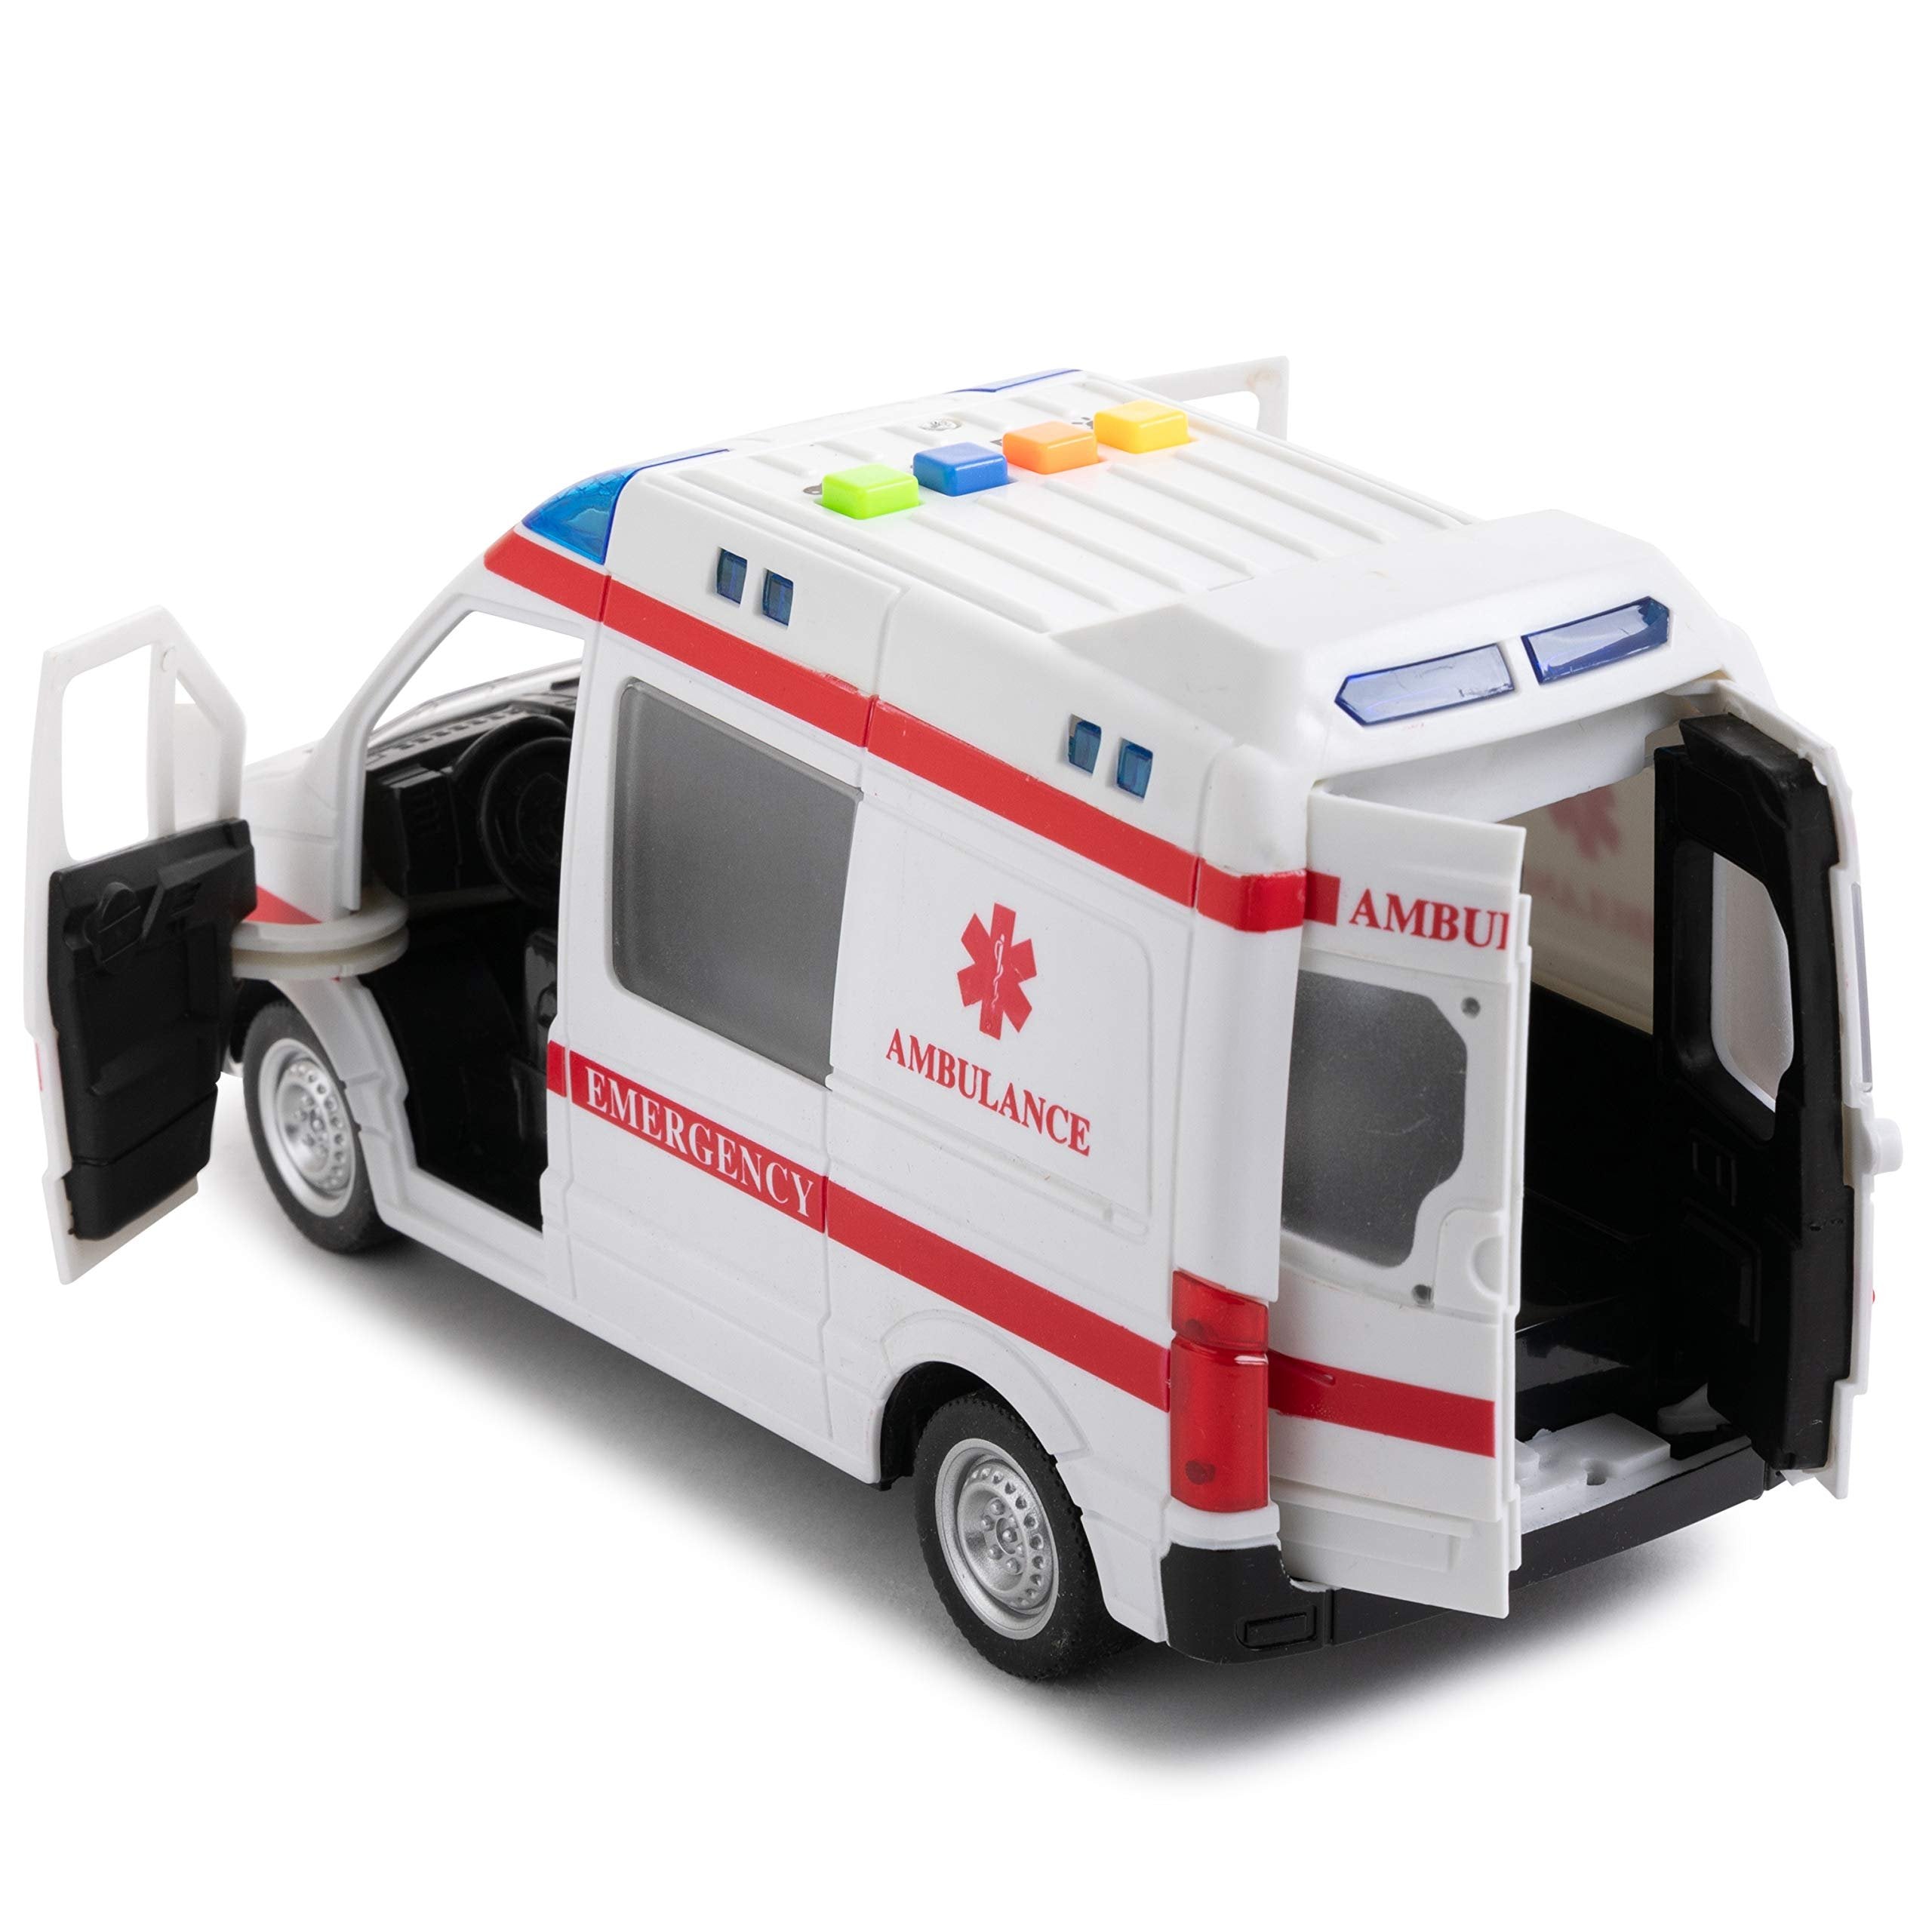 Toy To Enjoy Ambulance Toy Car with Light & Siren Sound Effects - Friction Powered Wheels & LED Lights - Heavy Duty Plastic Rescue Vehicle Toy for Kids & Children